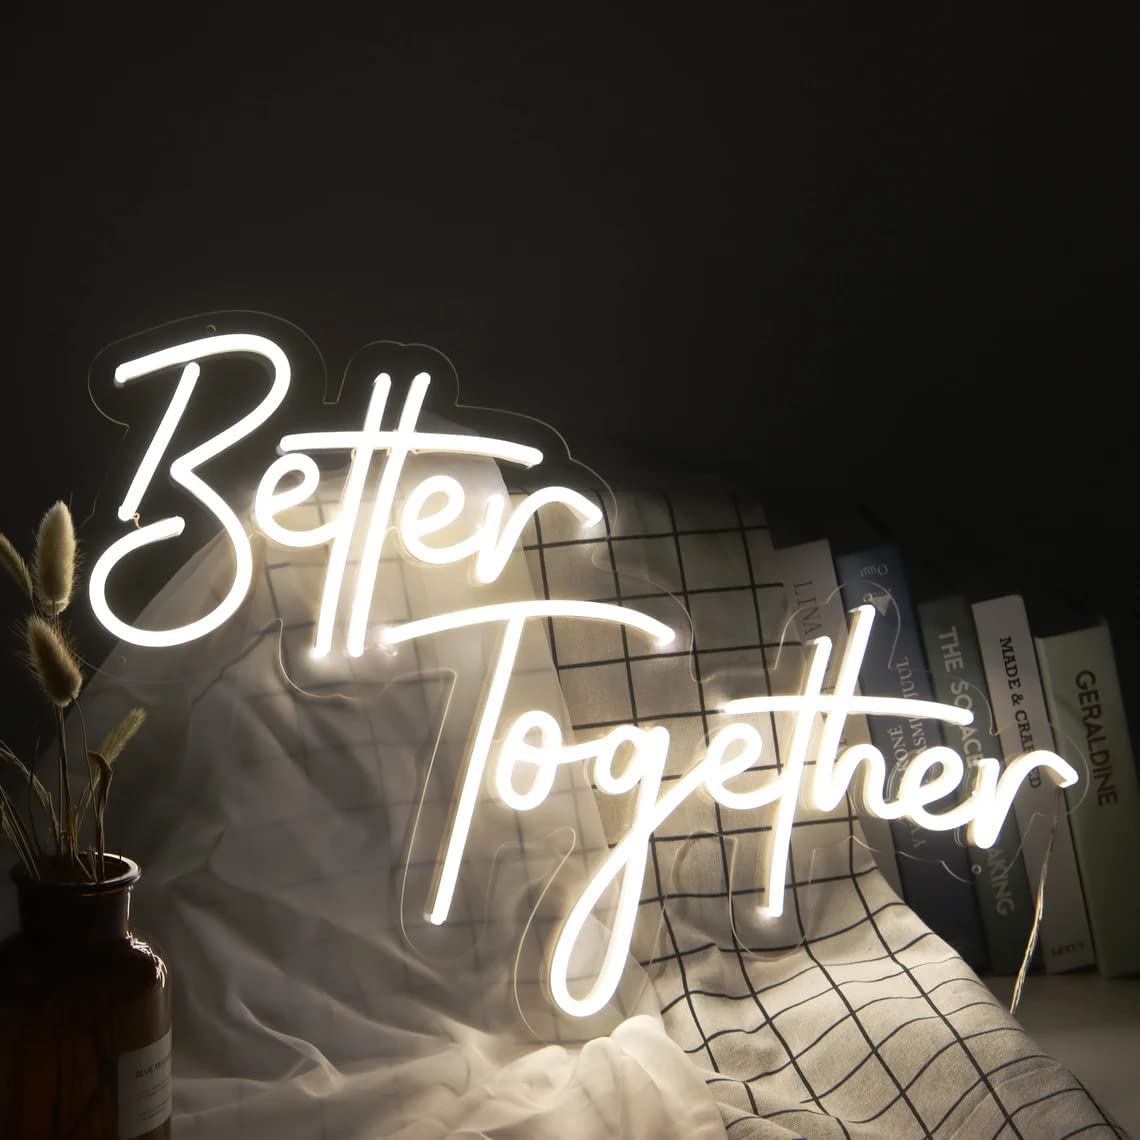 Beautiful Led Neon Better Together Light Sign | Custom Neon Sign